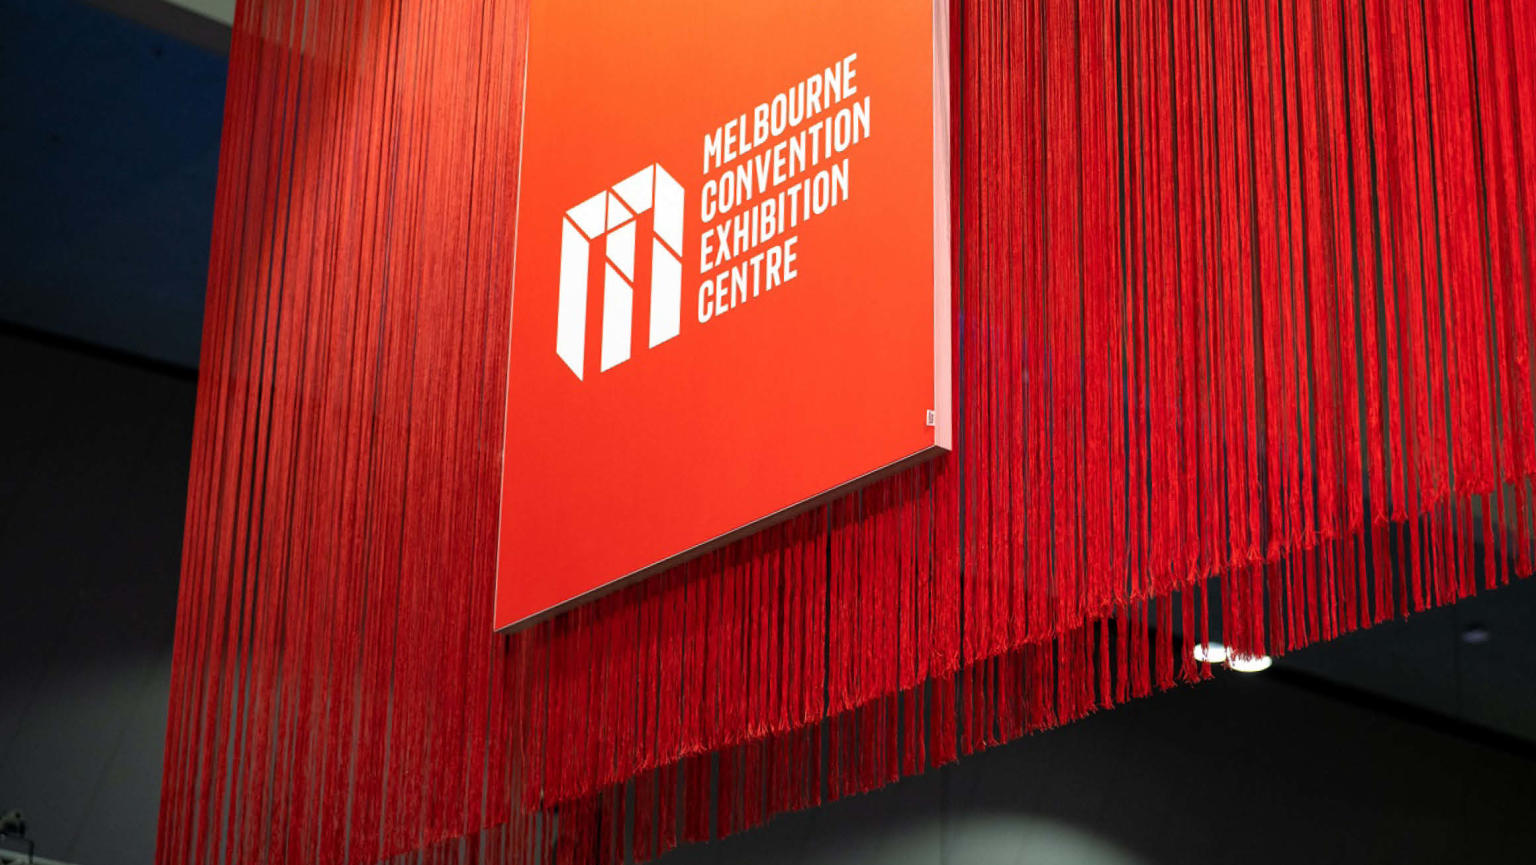 Striking long red fringing accompanied by a prominent red board displaying a logo and the text 'Melbourne Convention Exhibition Centre'.